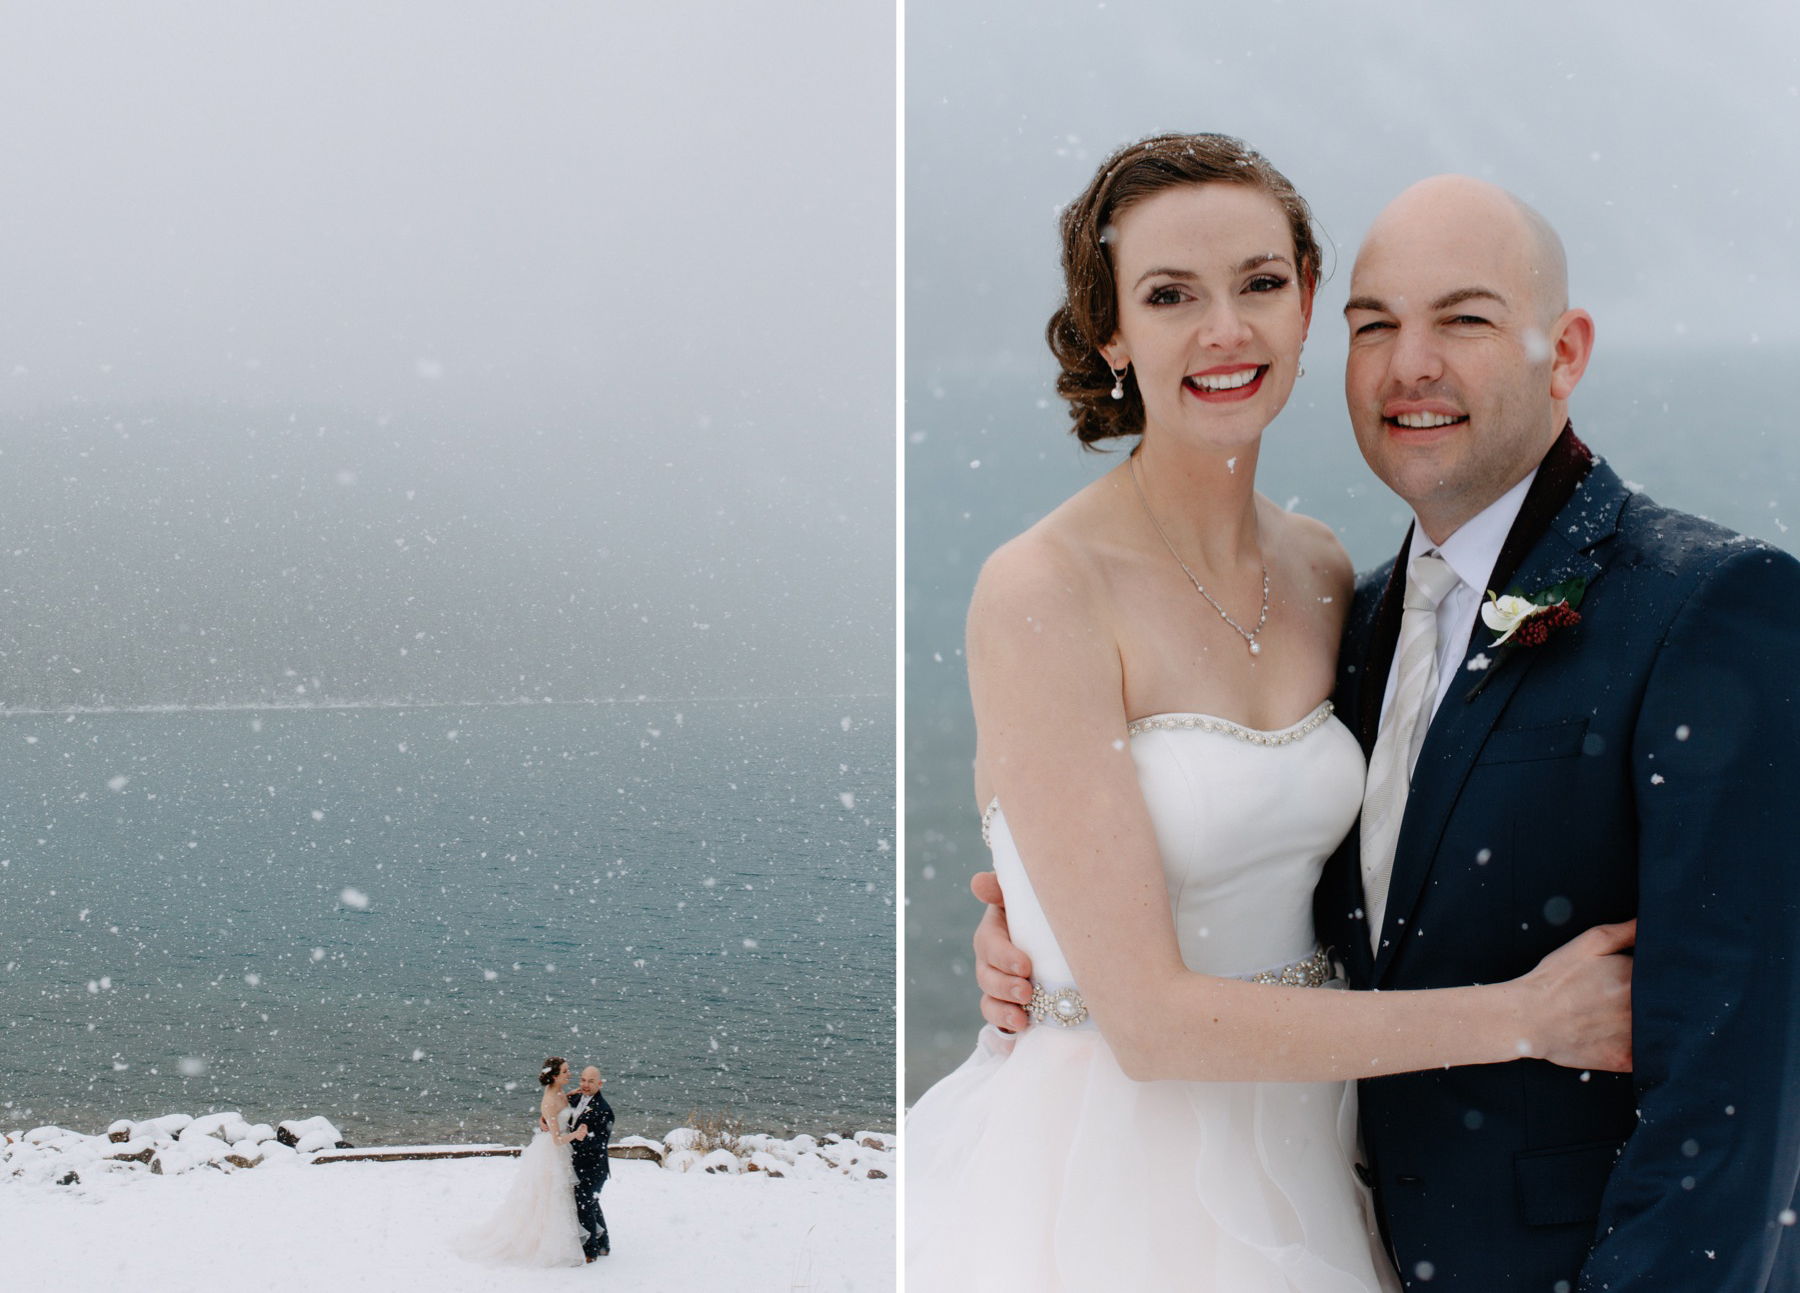 Snowy winter wedding at Chateau Lake Louise bridal party location